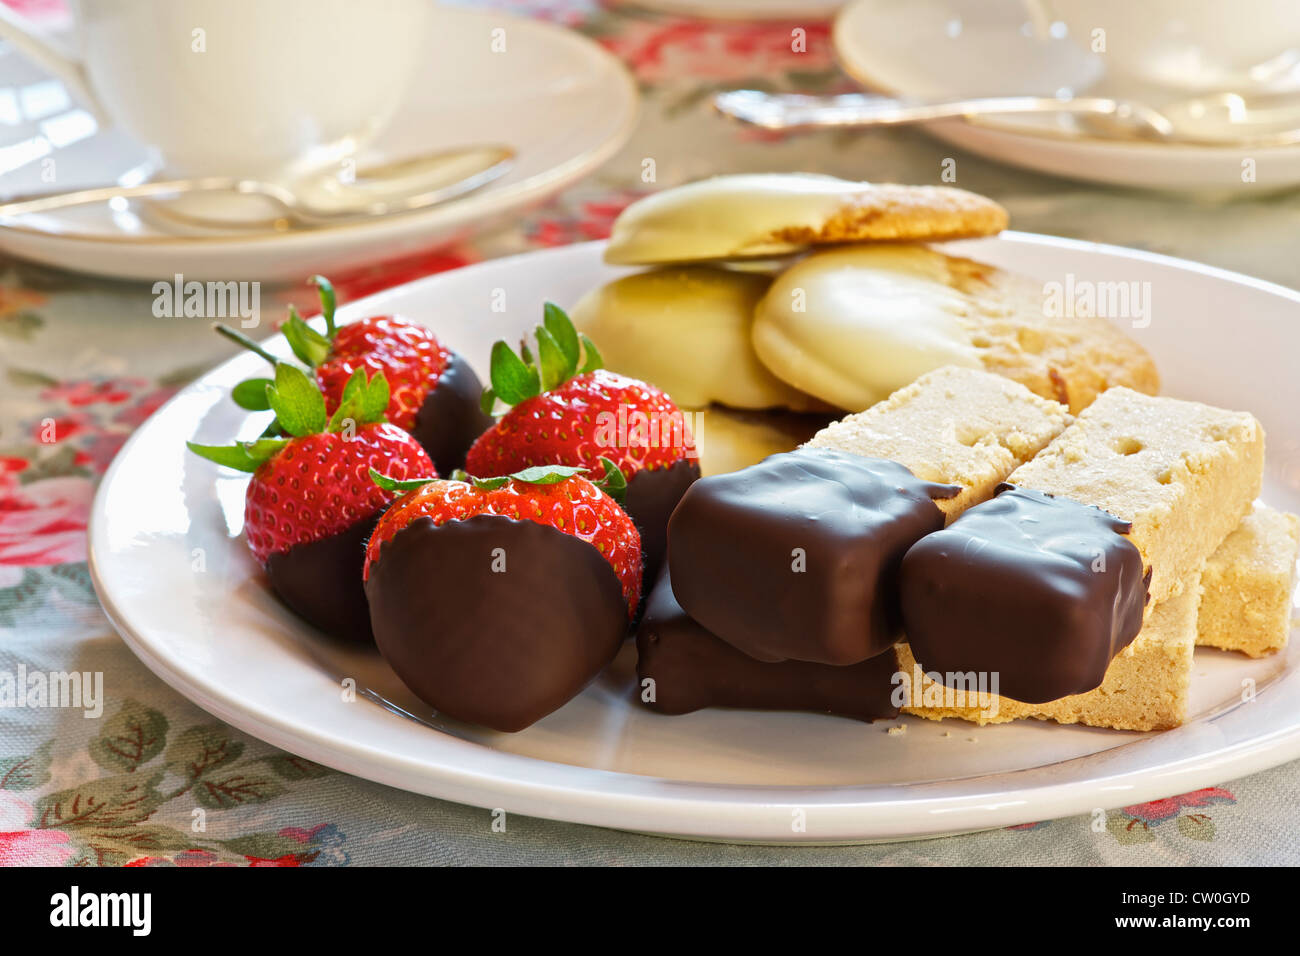 Plate of chocolate dipped desserts Stock Photo